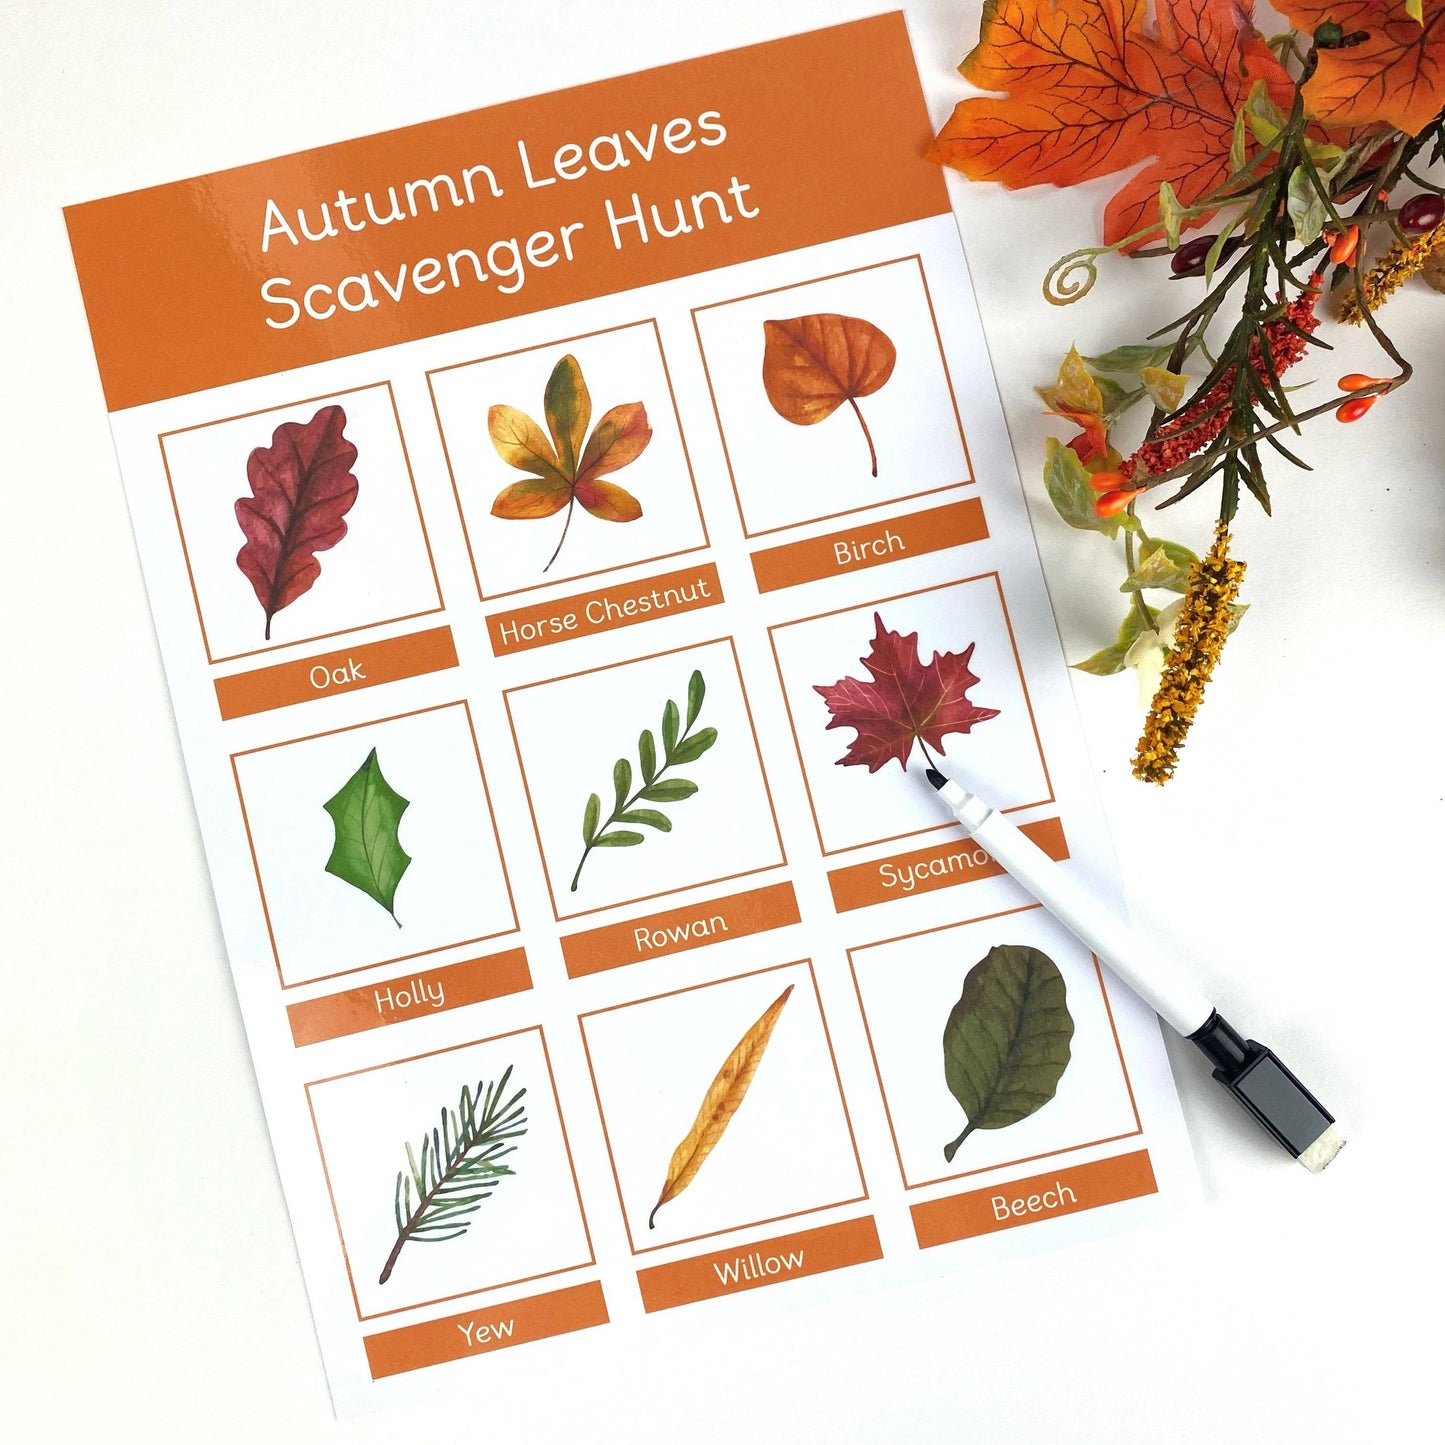 2 Pack Autumn Leaves Scavenger Hunt Mat & Find and Count Learning Mat-Little Boo Learning-normal